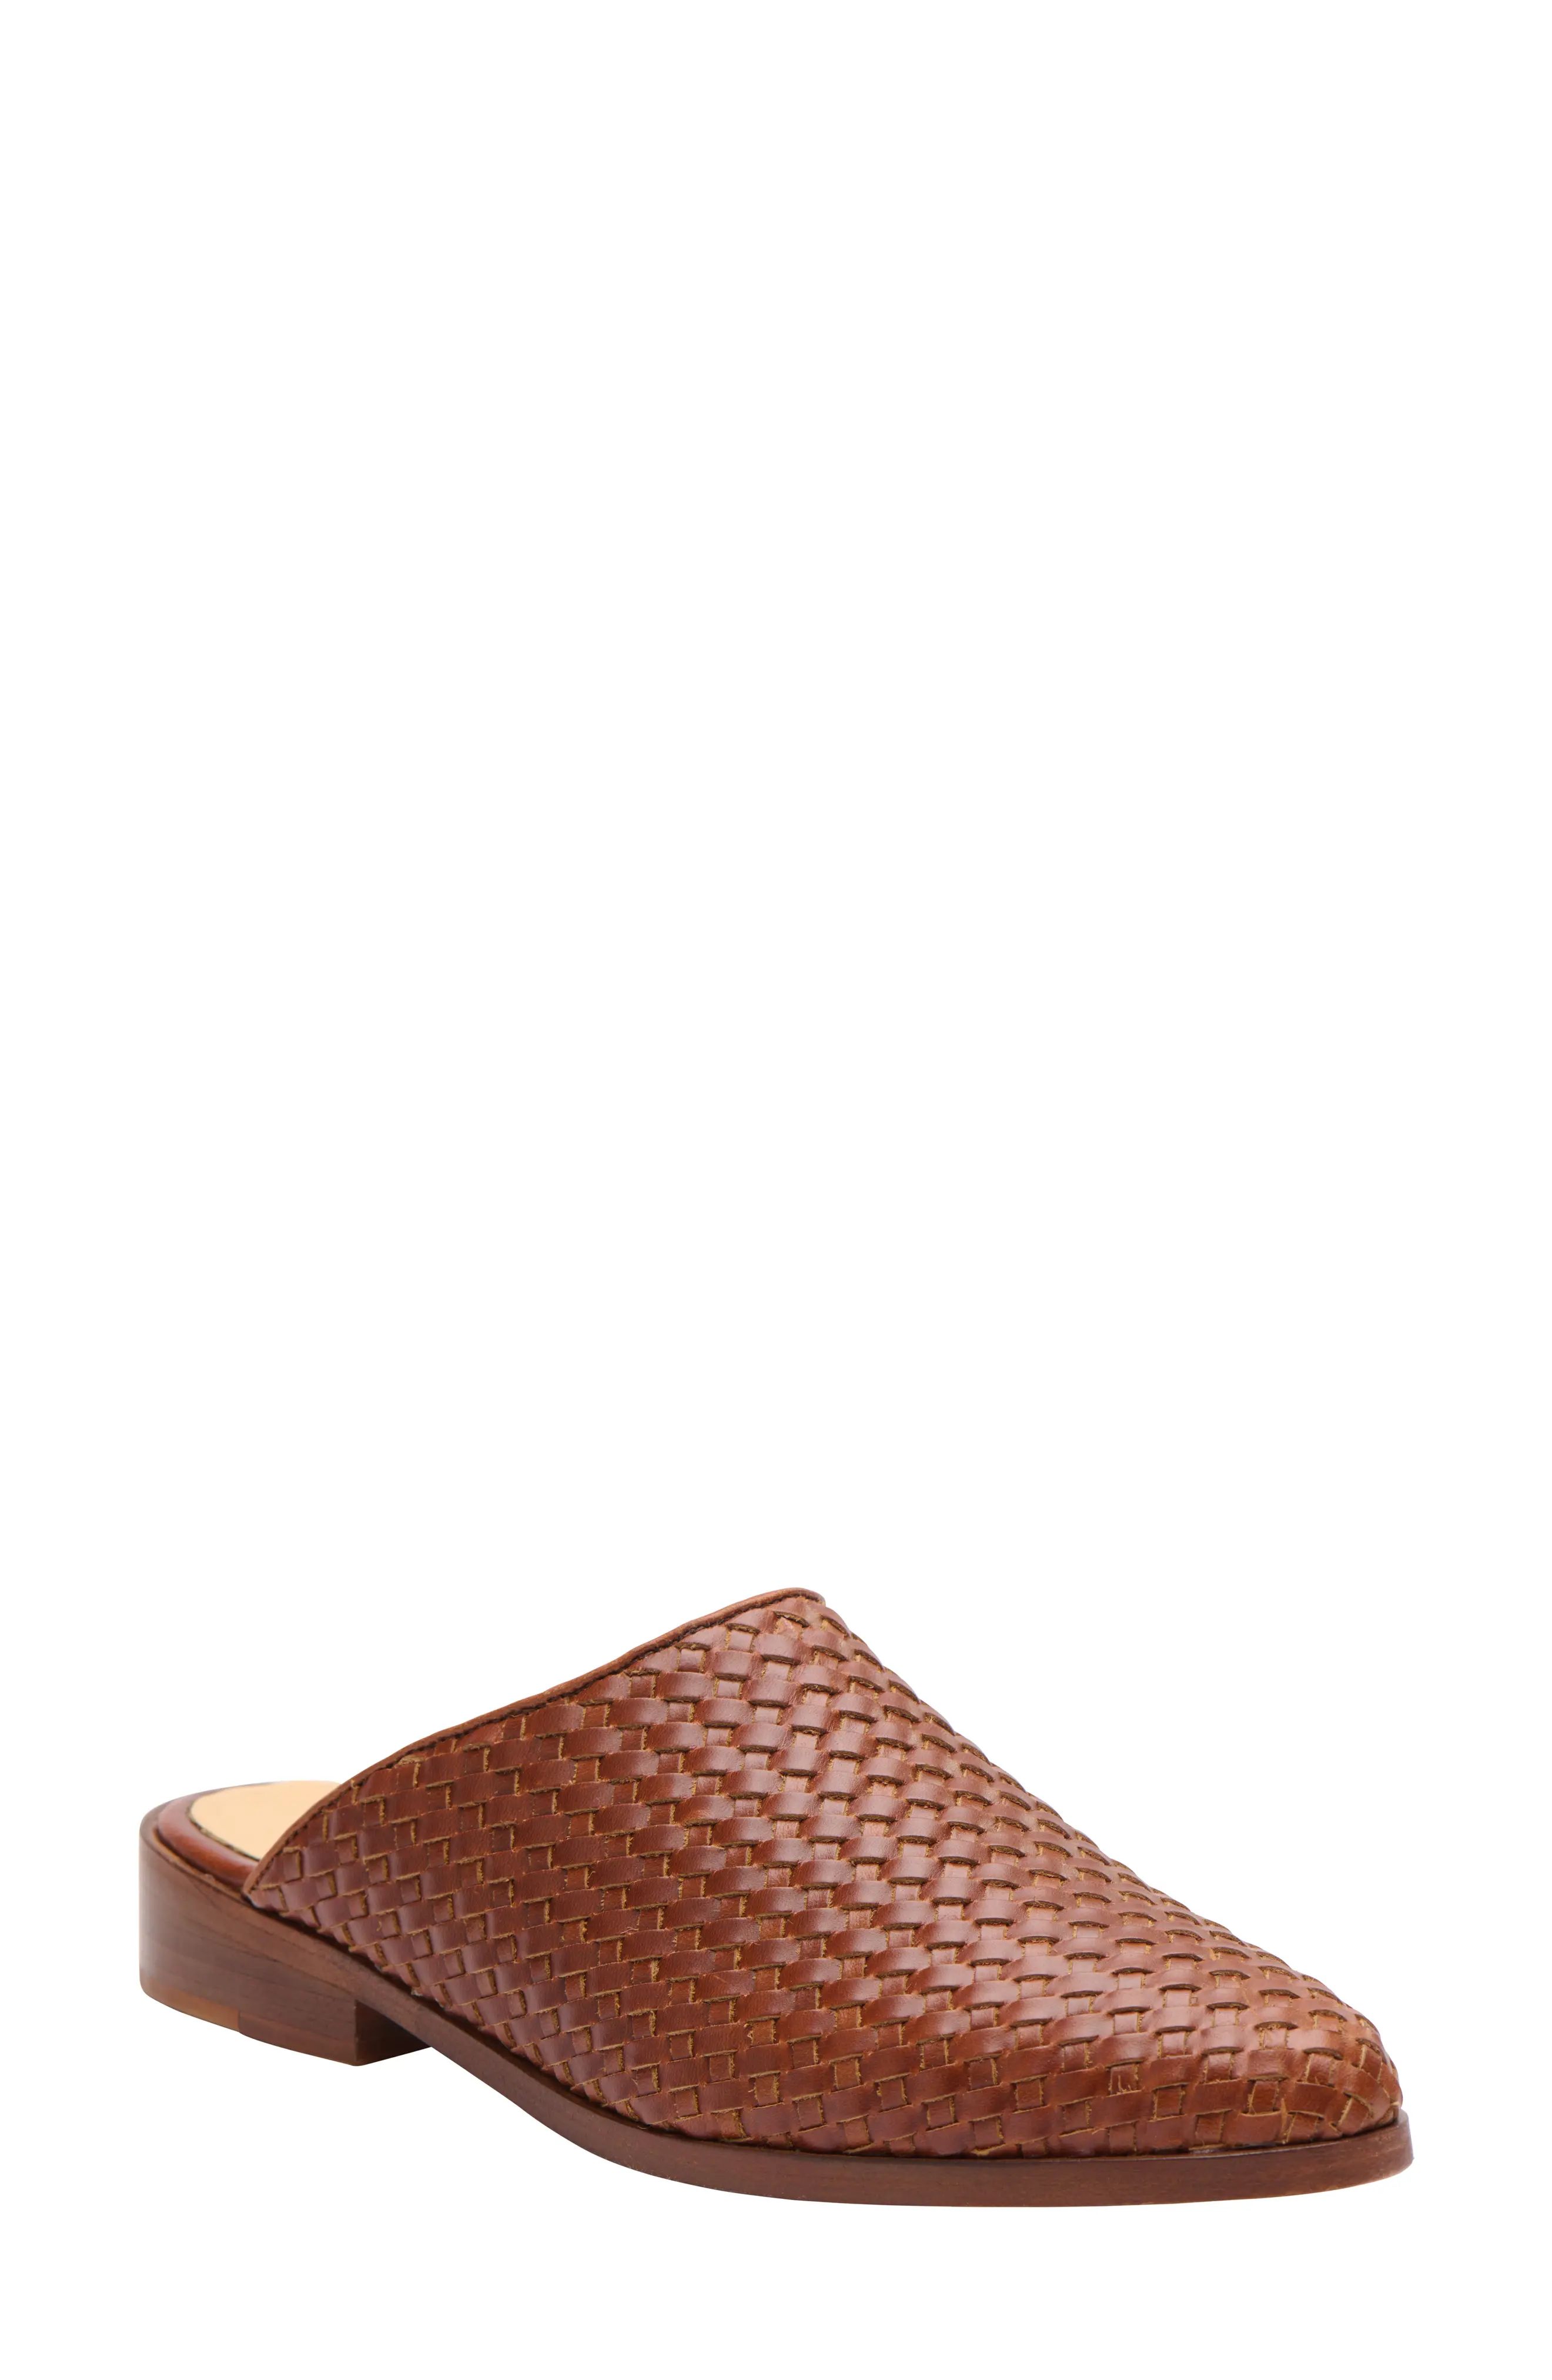 Nisolo Ama Woven Mule, Size 10 in Brandy at Nordstrom | Nordstrom